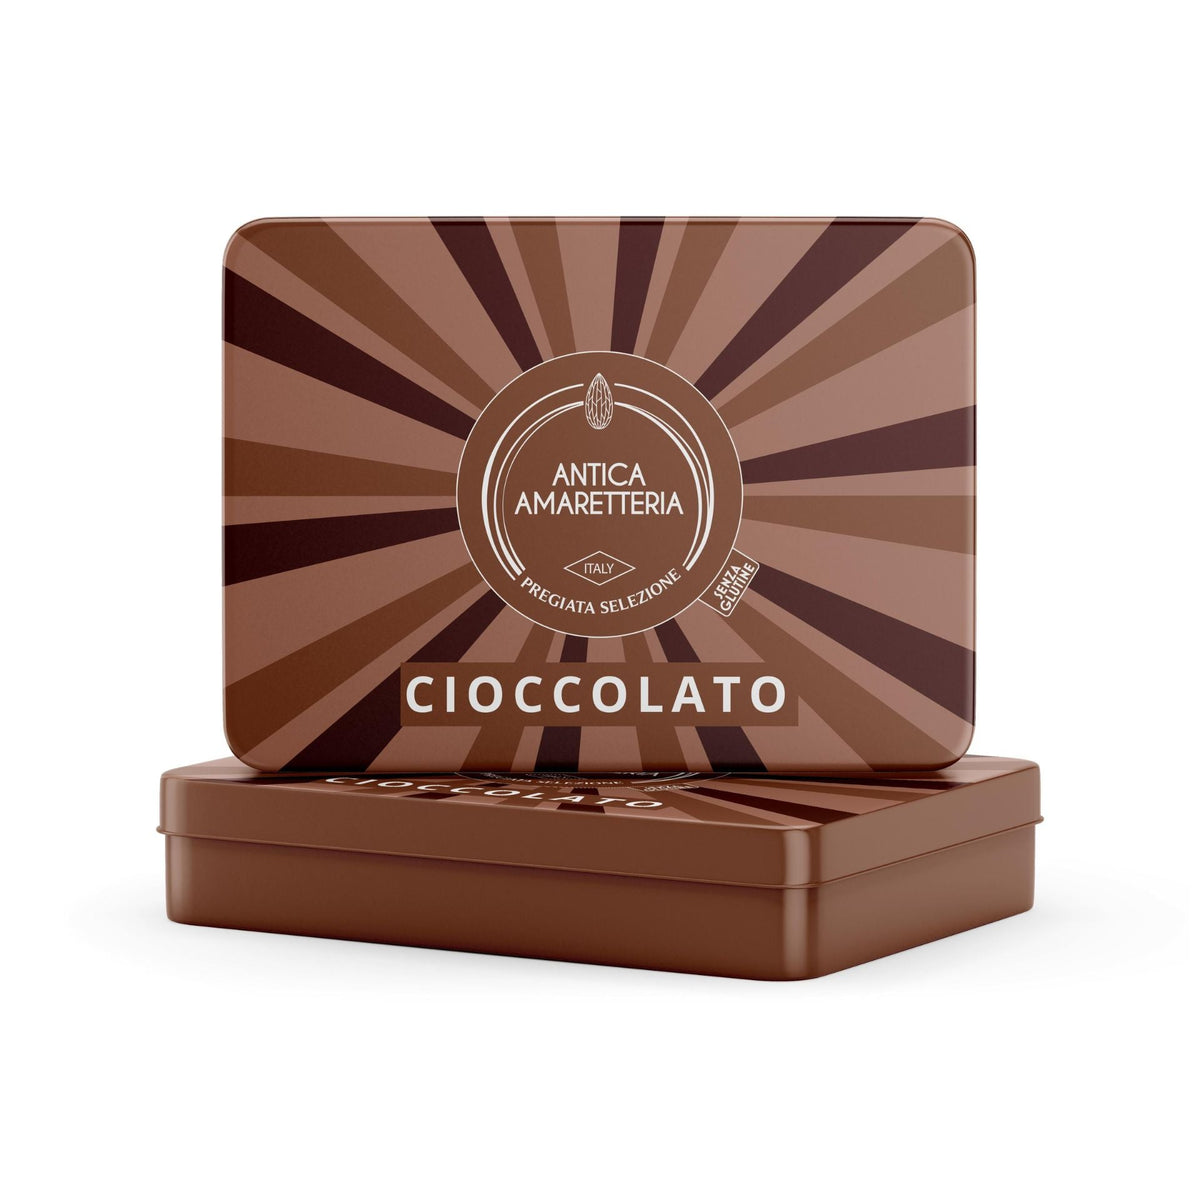 Antica Amaretteria Soft Chocolate Amaretti 150g (Tin)  | Imported and distributed in the UK by Just Gourmet Foods